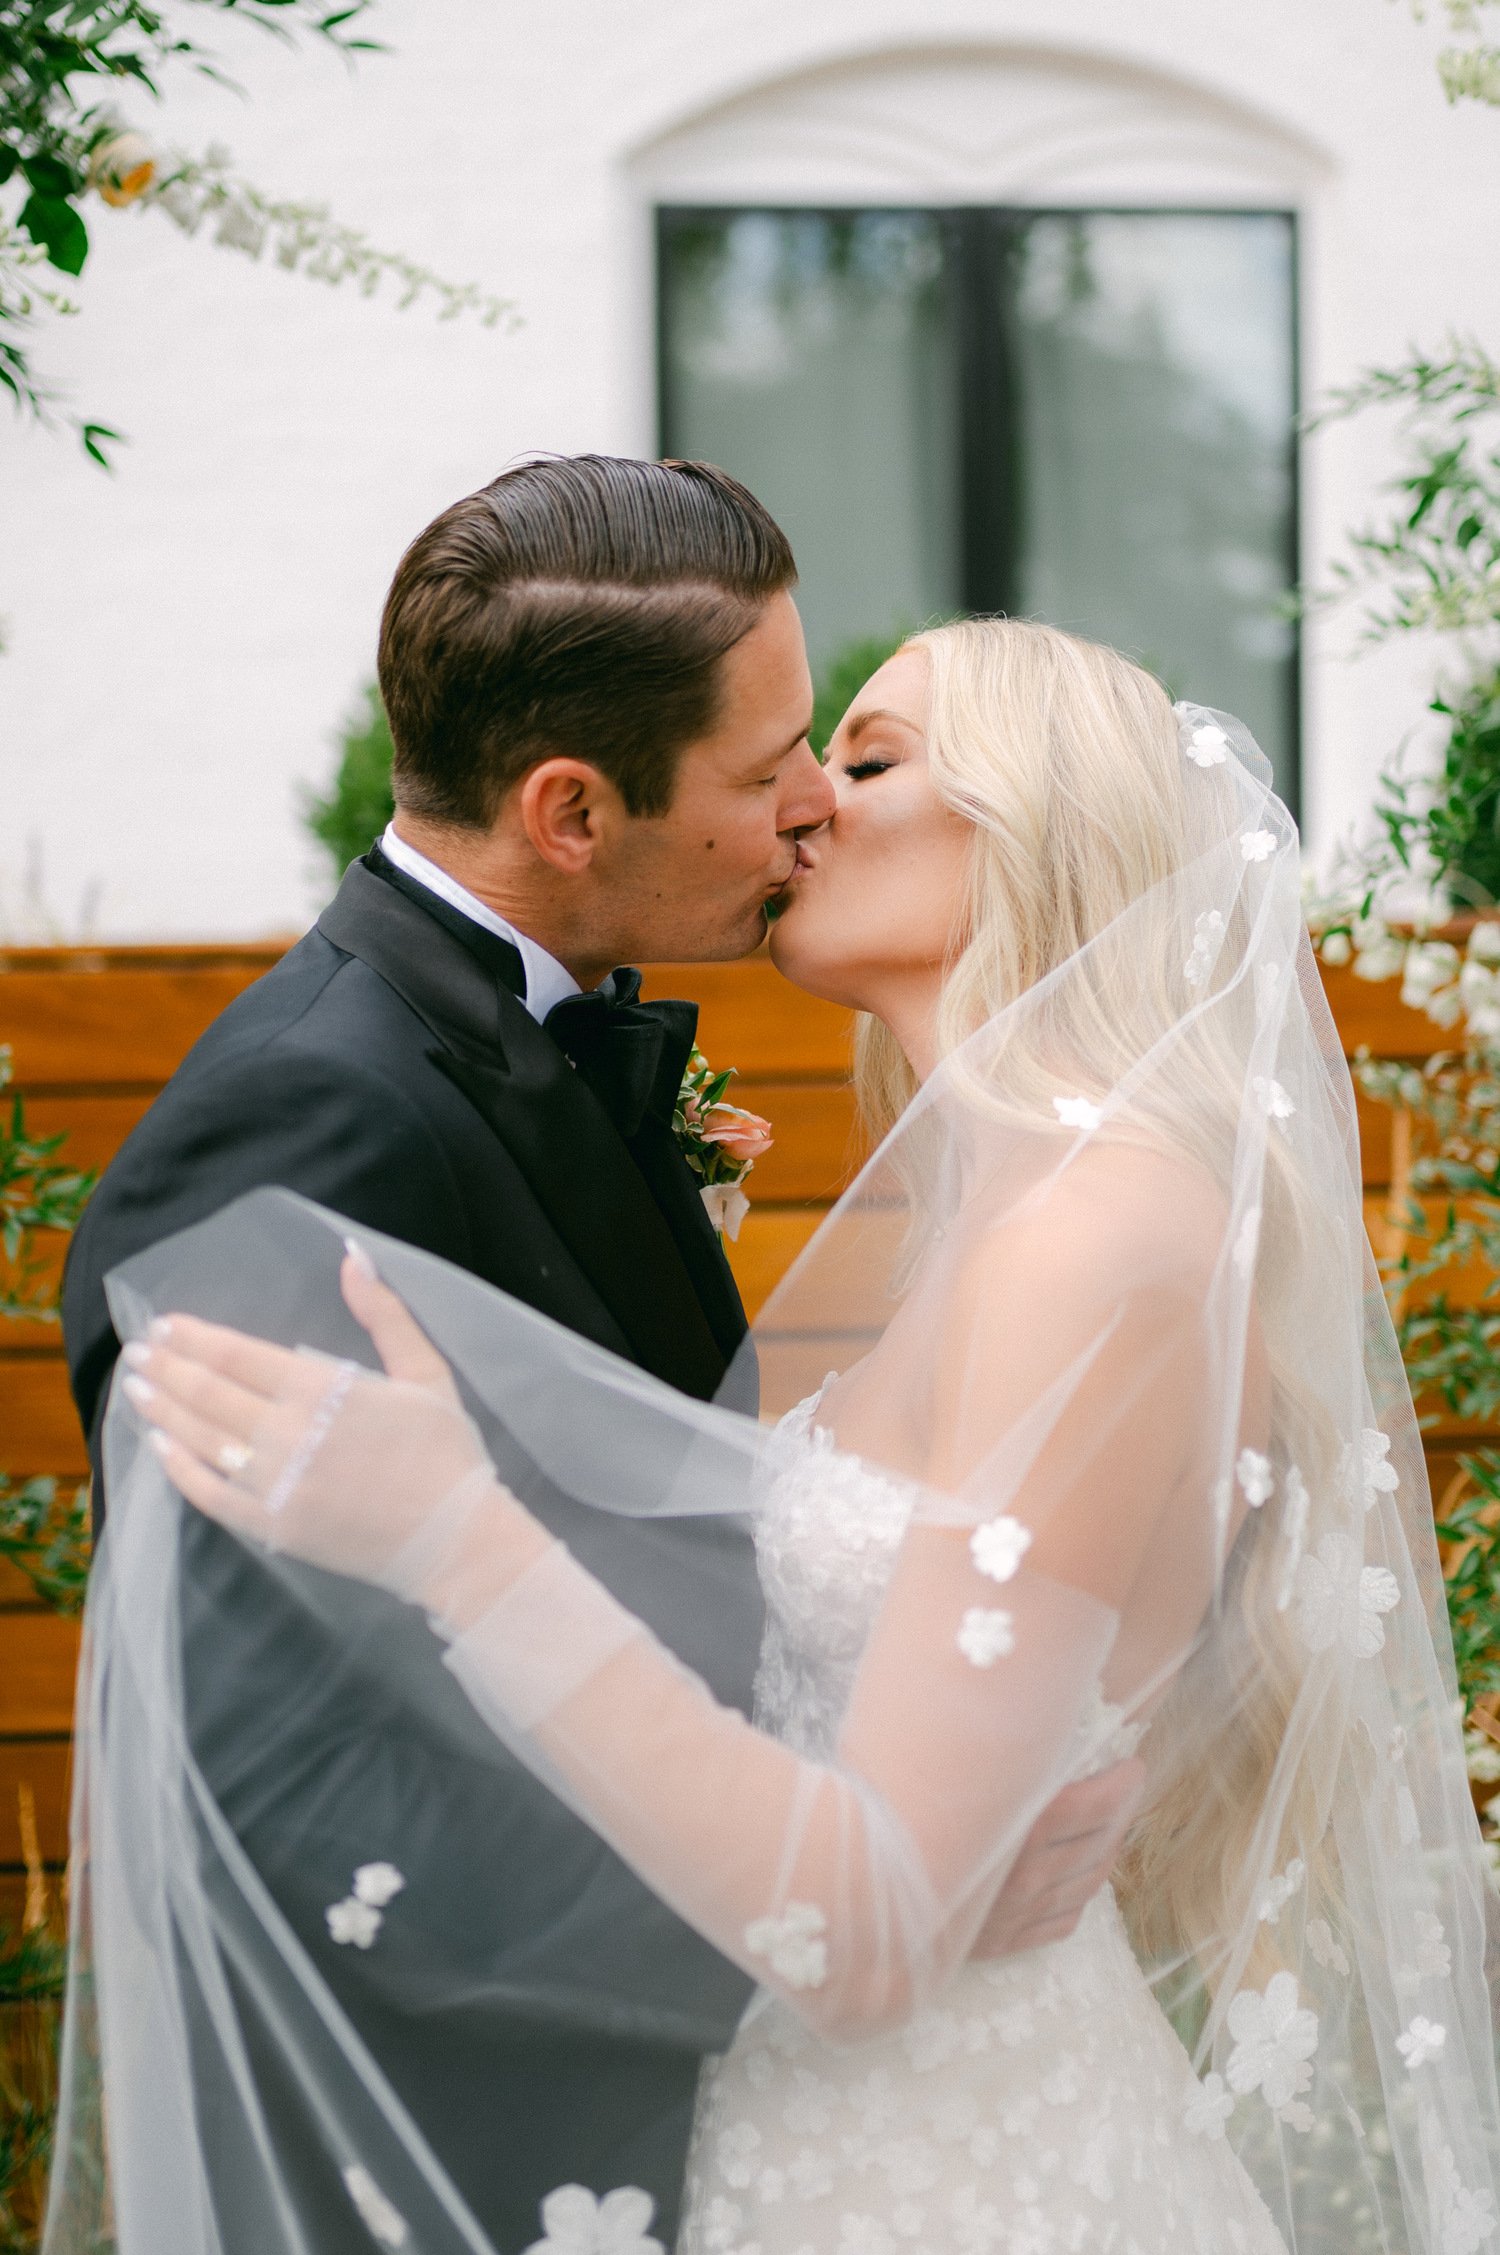 Elm Estate Wedding photos, photo of the bride and groom kissing , and a close up of the bride's wedding veil with intricate floral details